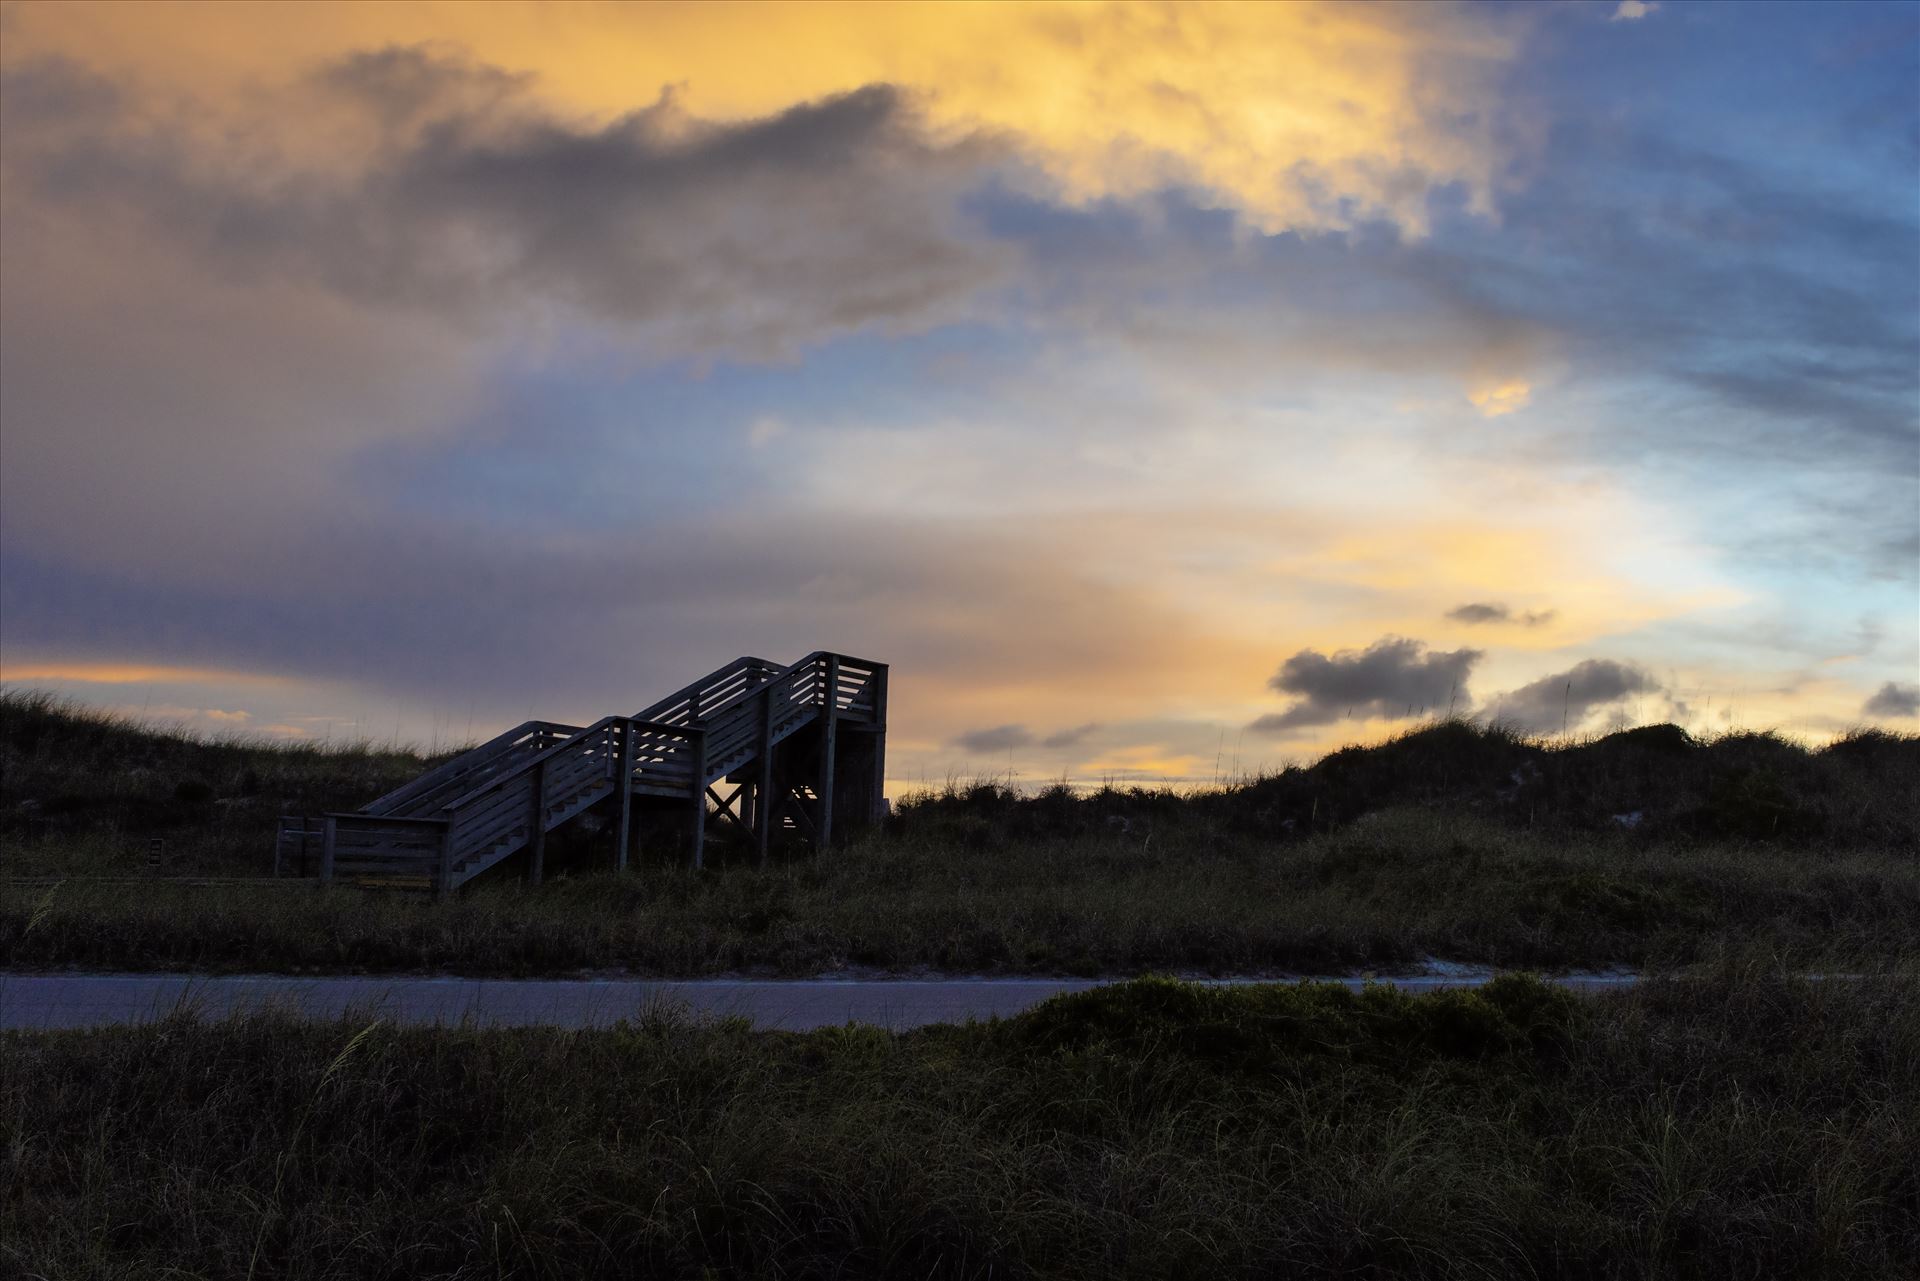 stair way to the beach port st. joe state park florida ss sf al RAW_5273.jpg Stairway to the beach at sunset. St. Joe State Park Florida by Terry Kelly Photography